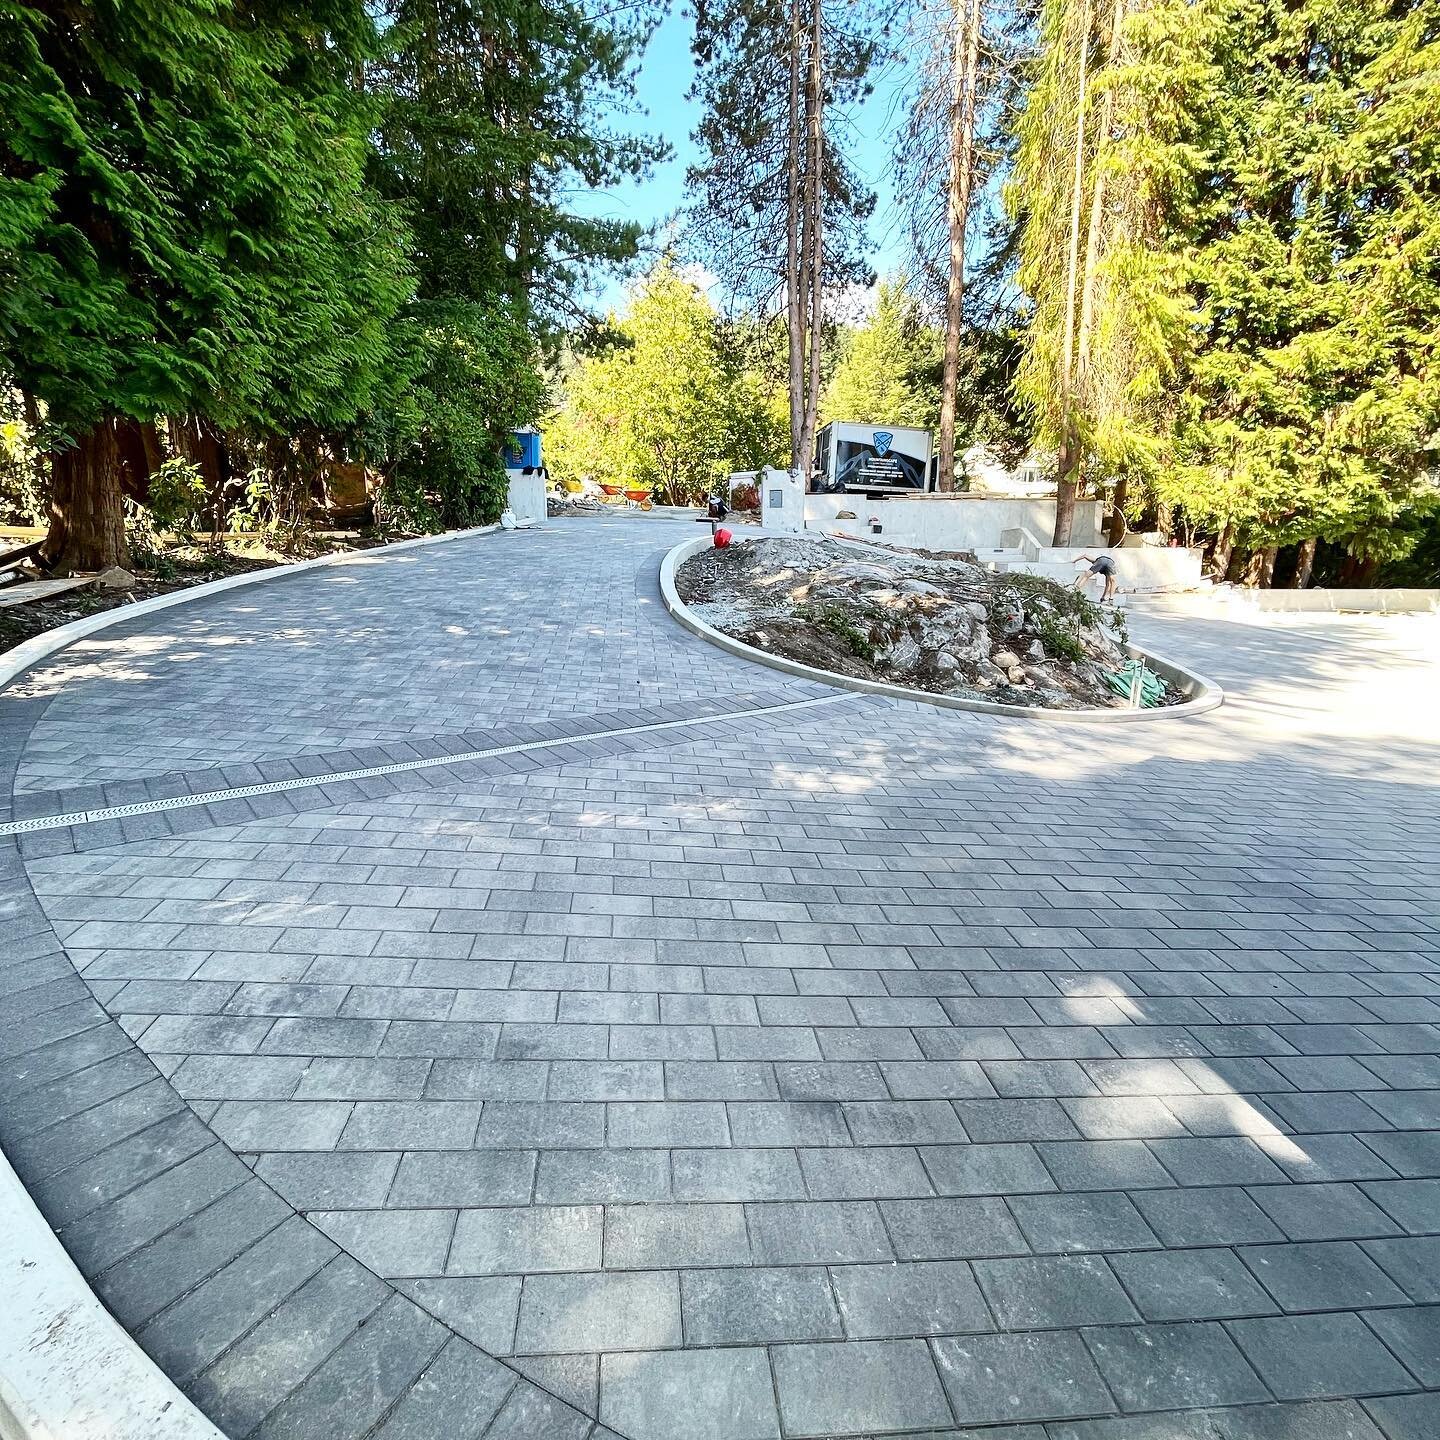 Just finished this stomper. Roundabout driveway in British Properties. Pavers used newstone dorado 6x12 in winter sky with charcoal 6x12 border. #mountainscape #hardscape #howtohardscape #pavers #pavingstones #landscaping #northshore #westvan #northv